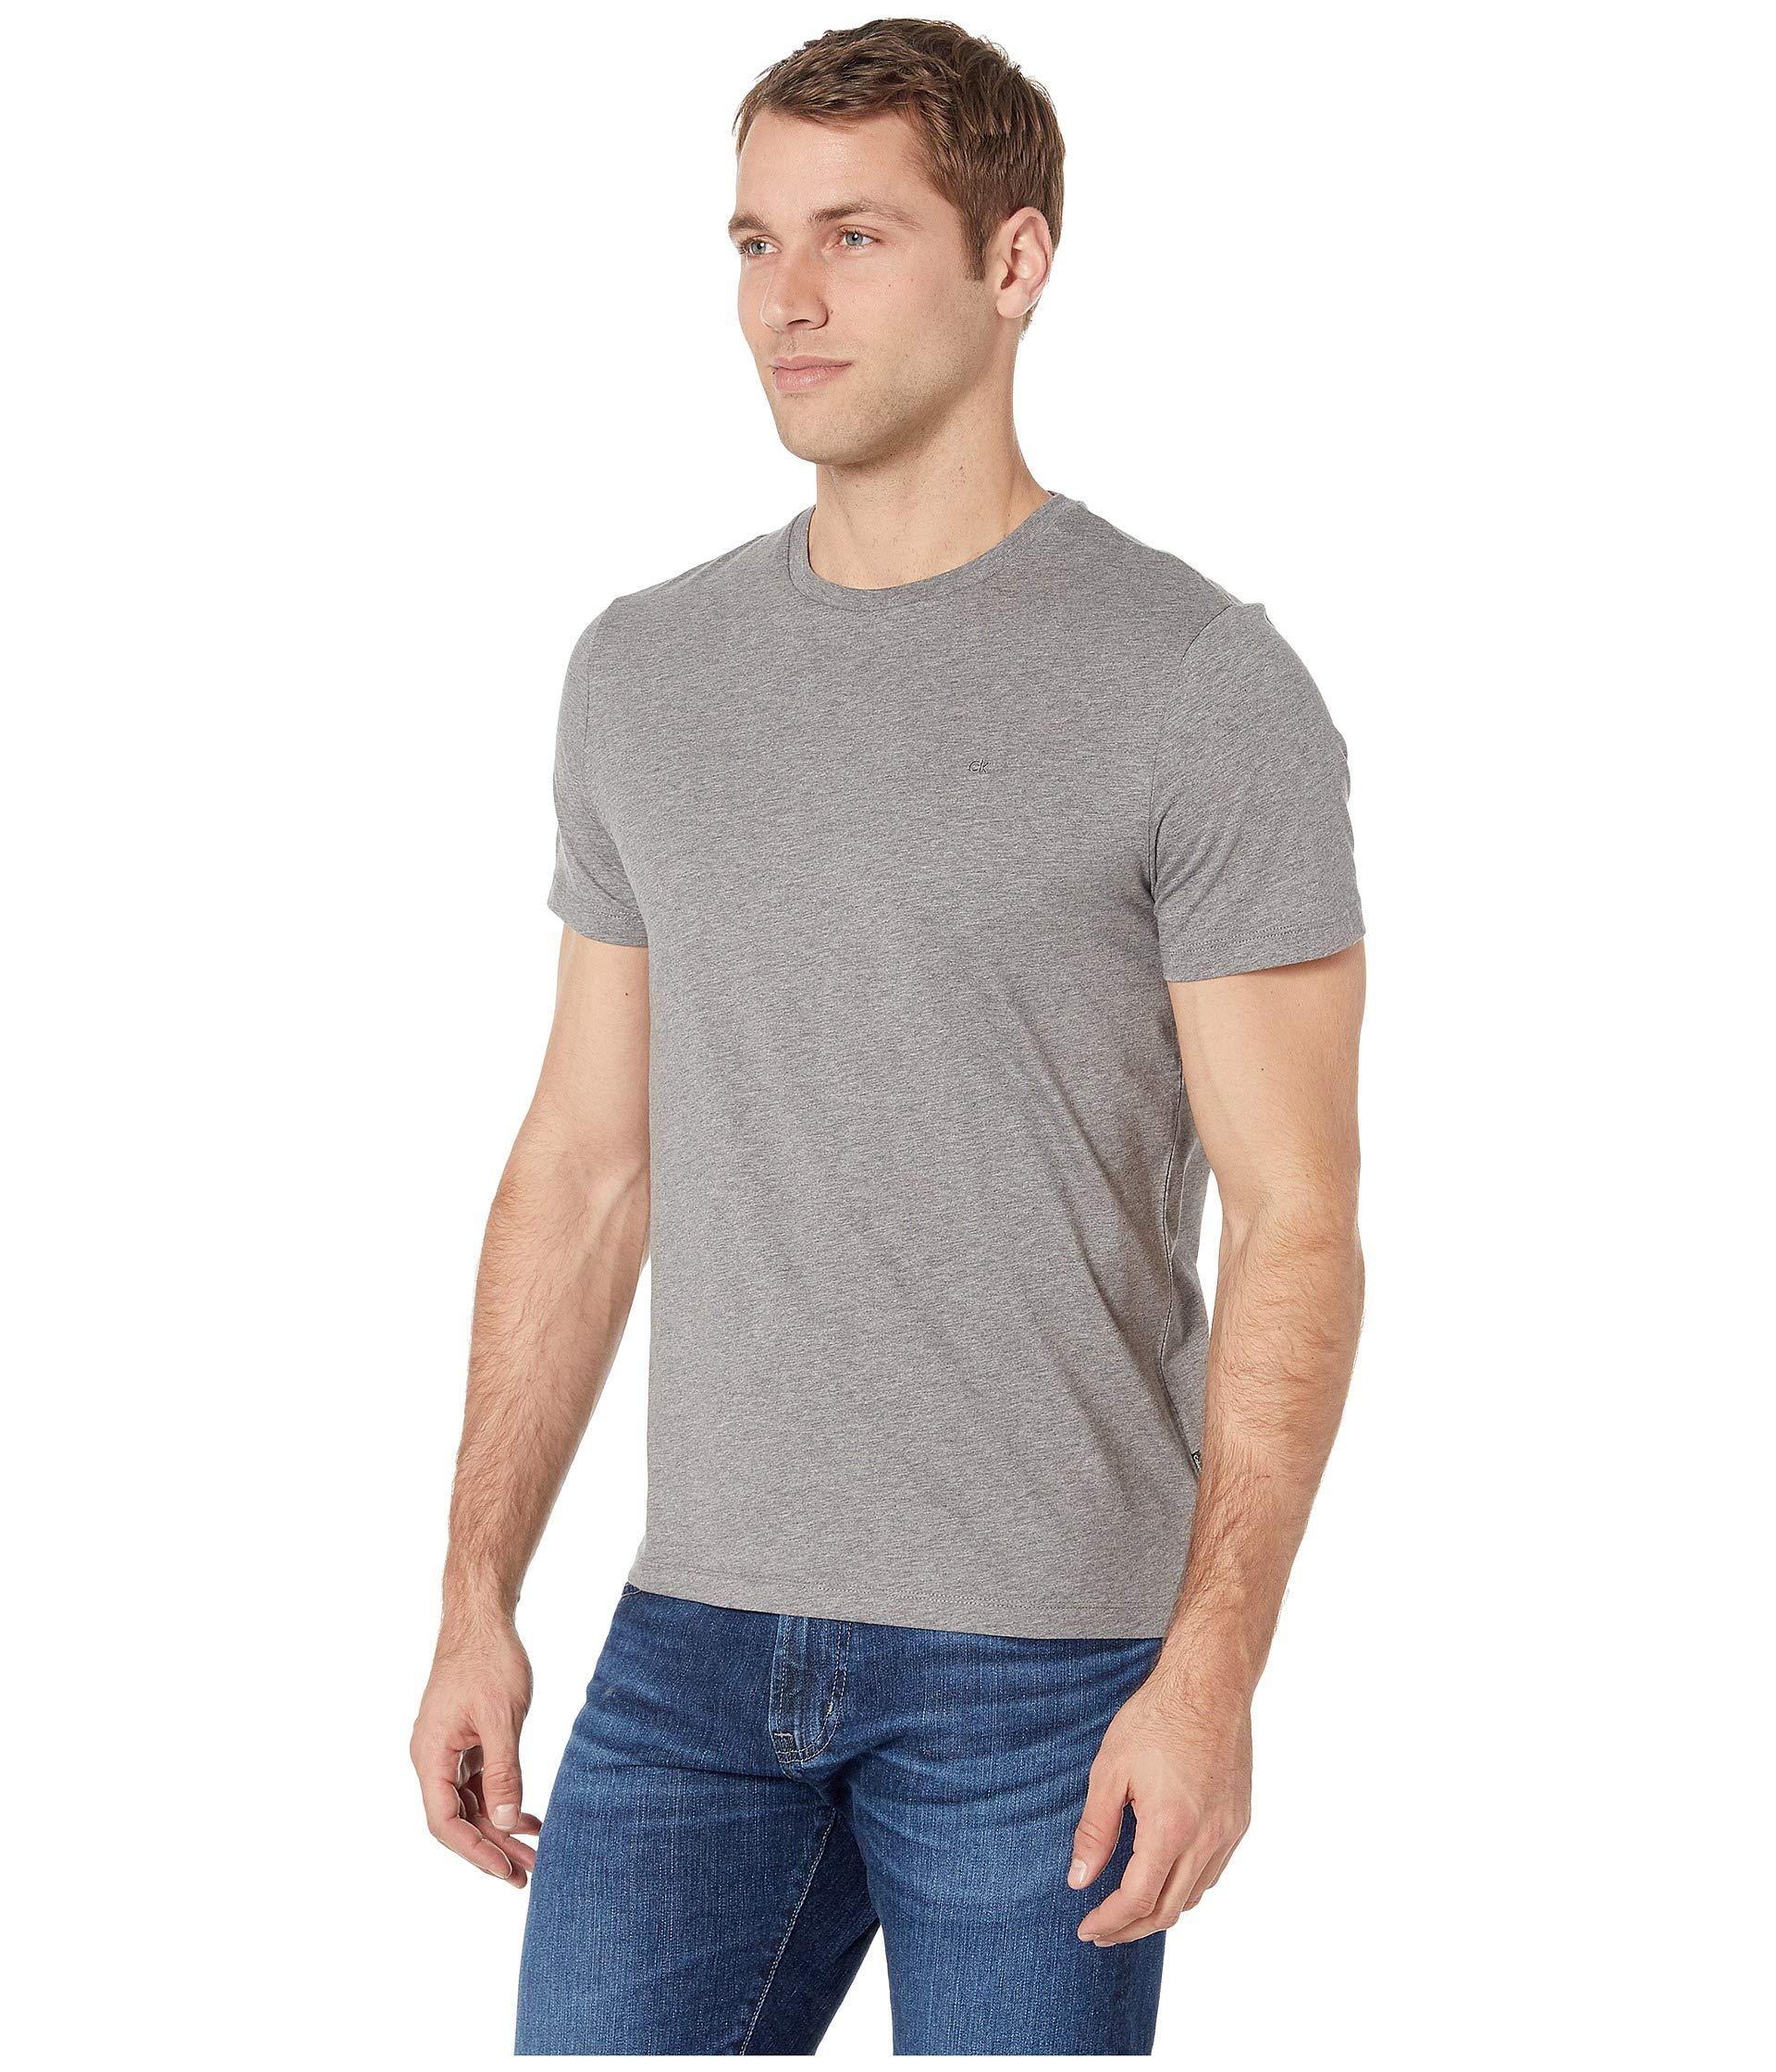 Calvin Klein Cotton The Jersey Tee in Gray for Men - Save 46% - Lyst